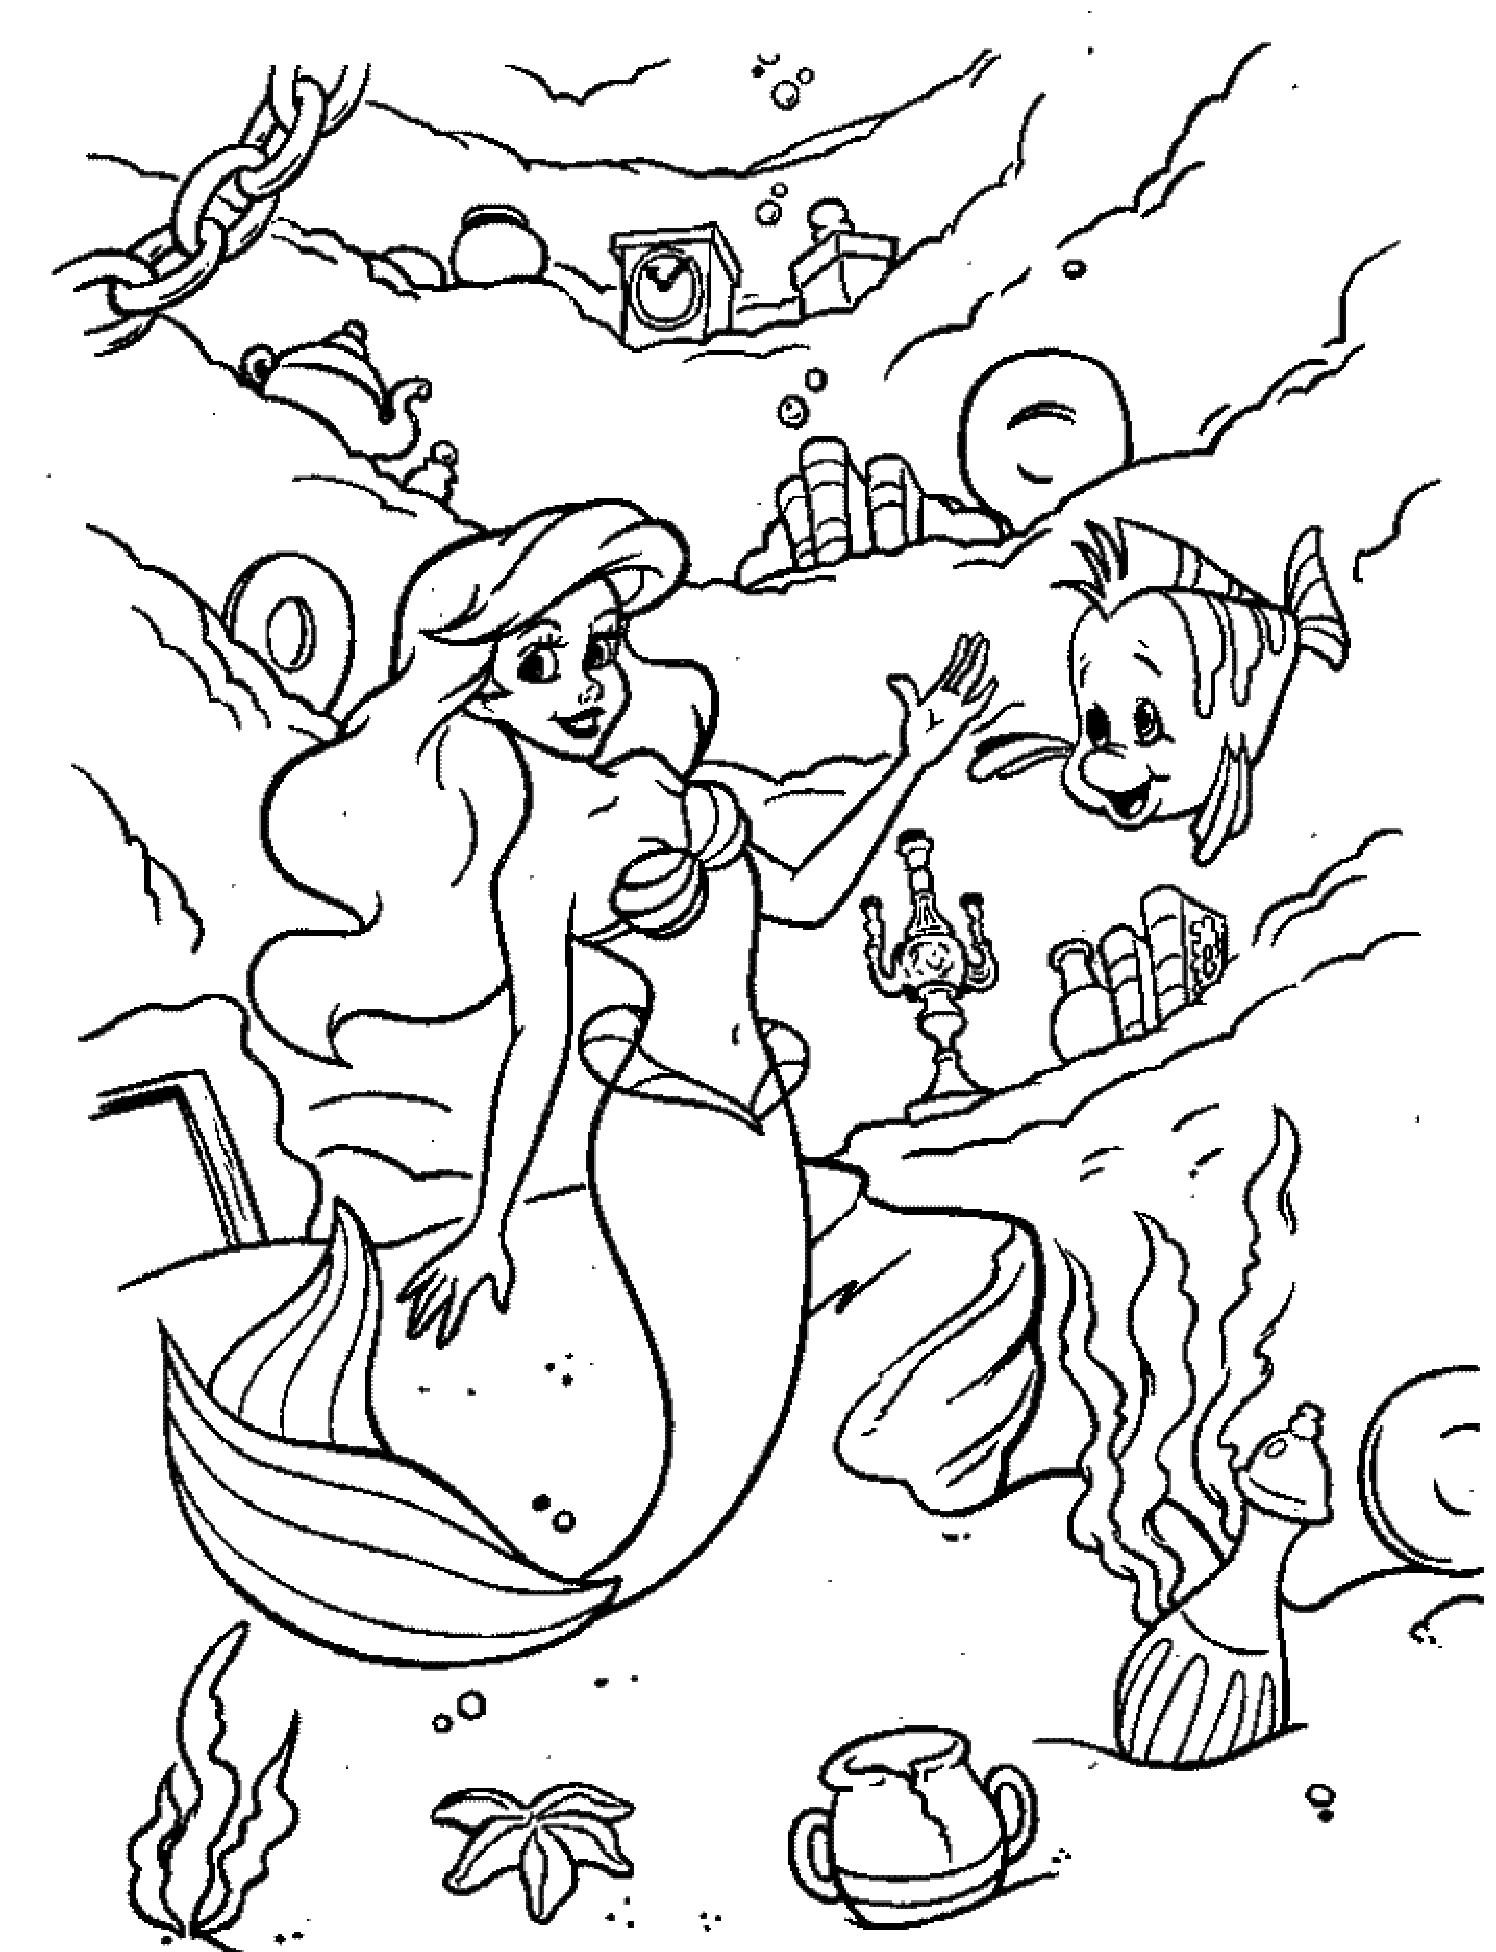 Kids Coloring Pages Mermaid
 The little mermaid coloring pages disney free printable